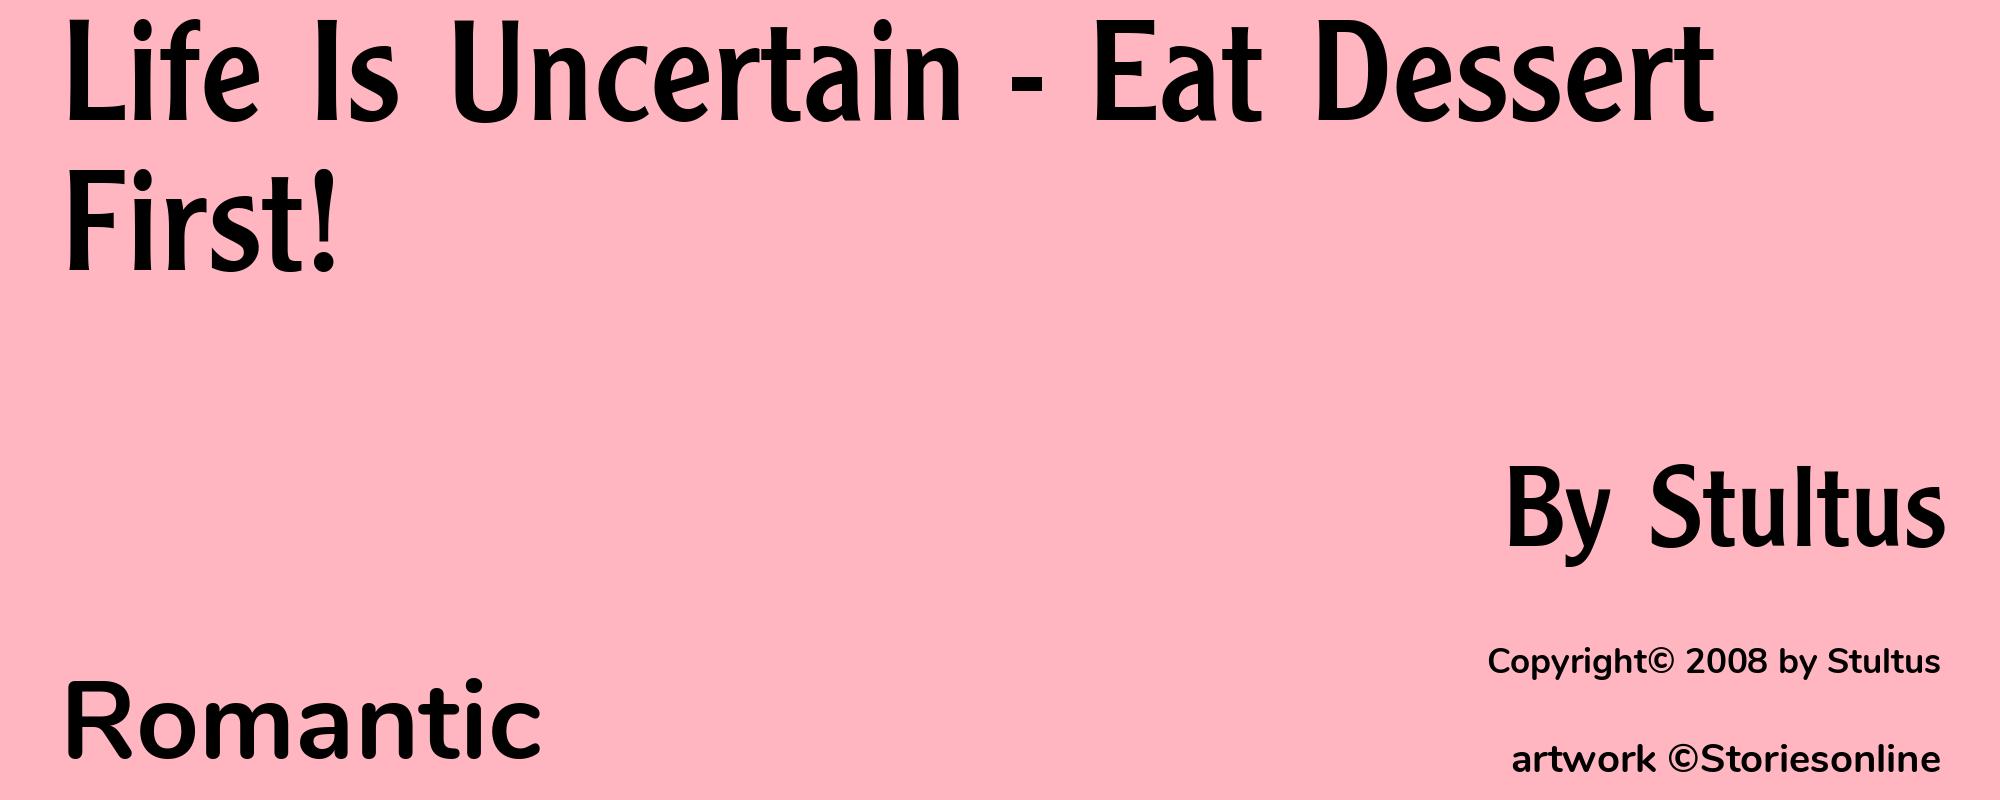 Life Is Uncertain - Eat Dessert First! - Cover